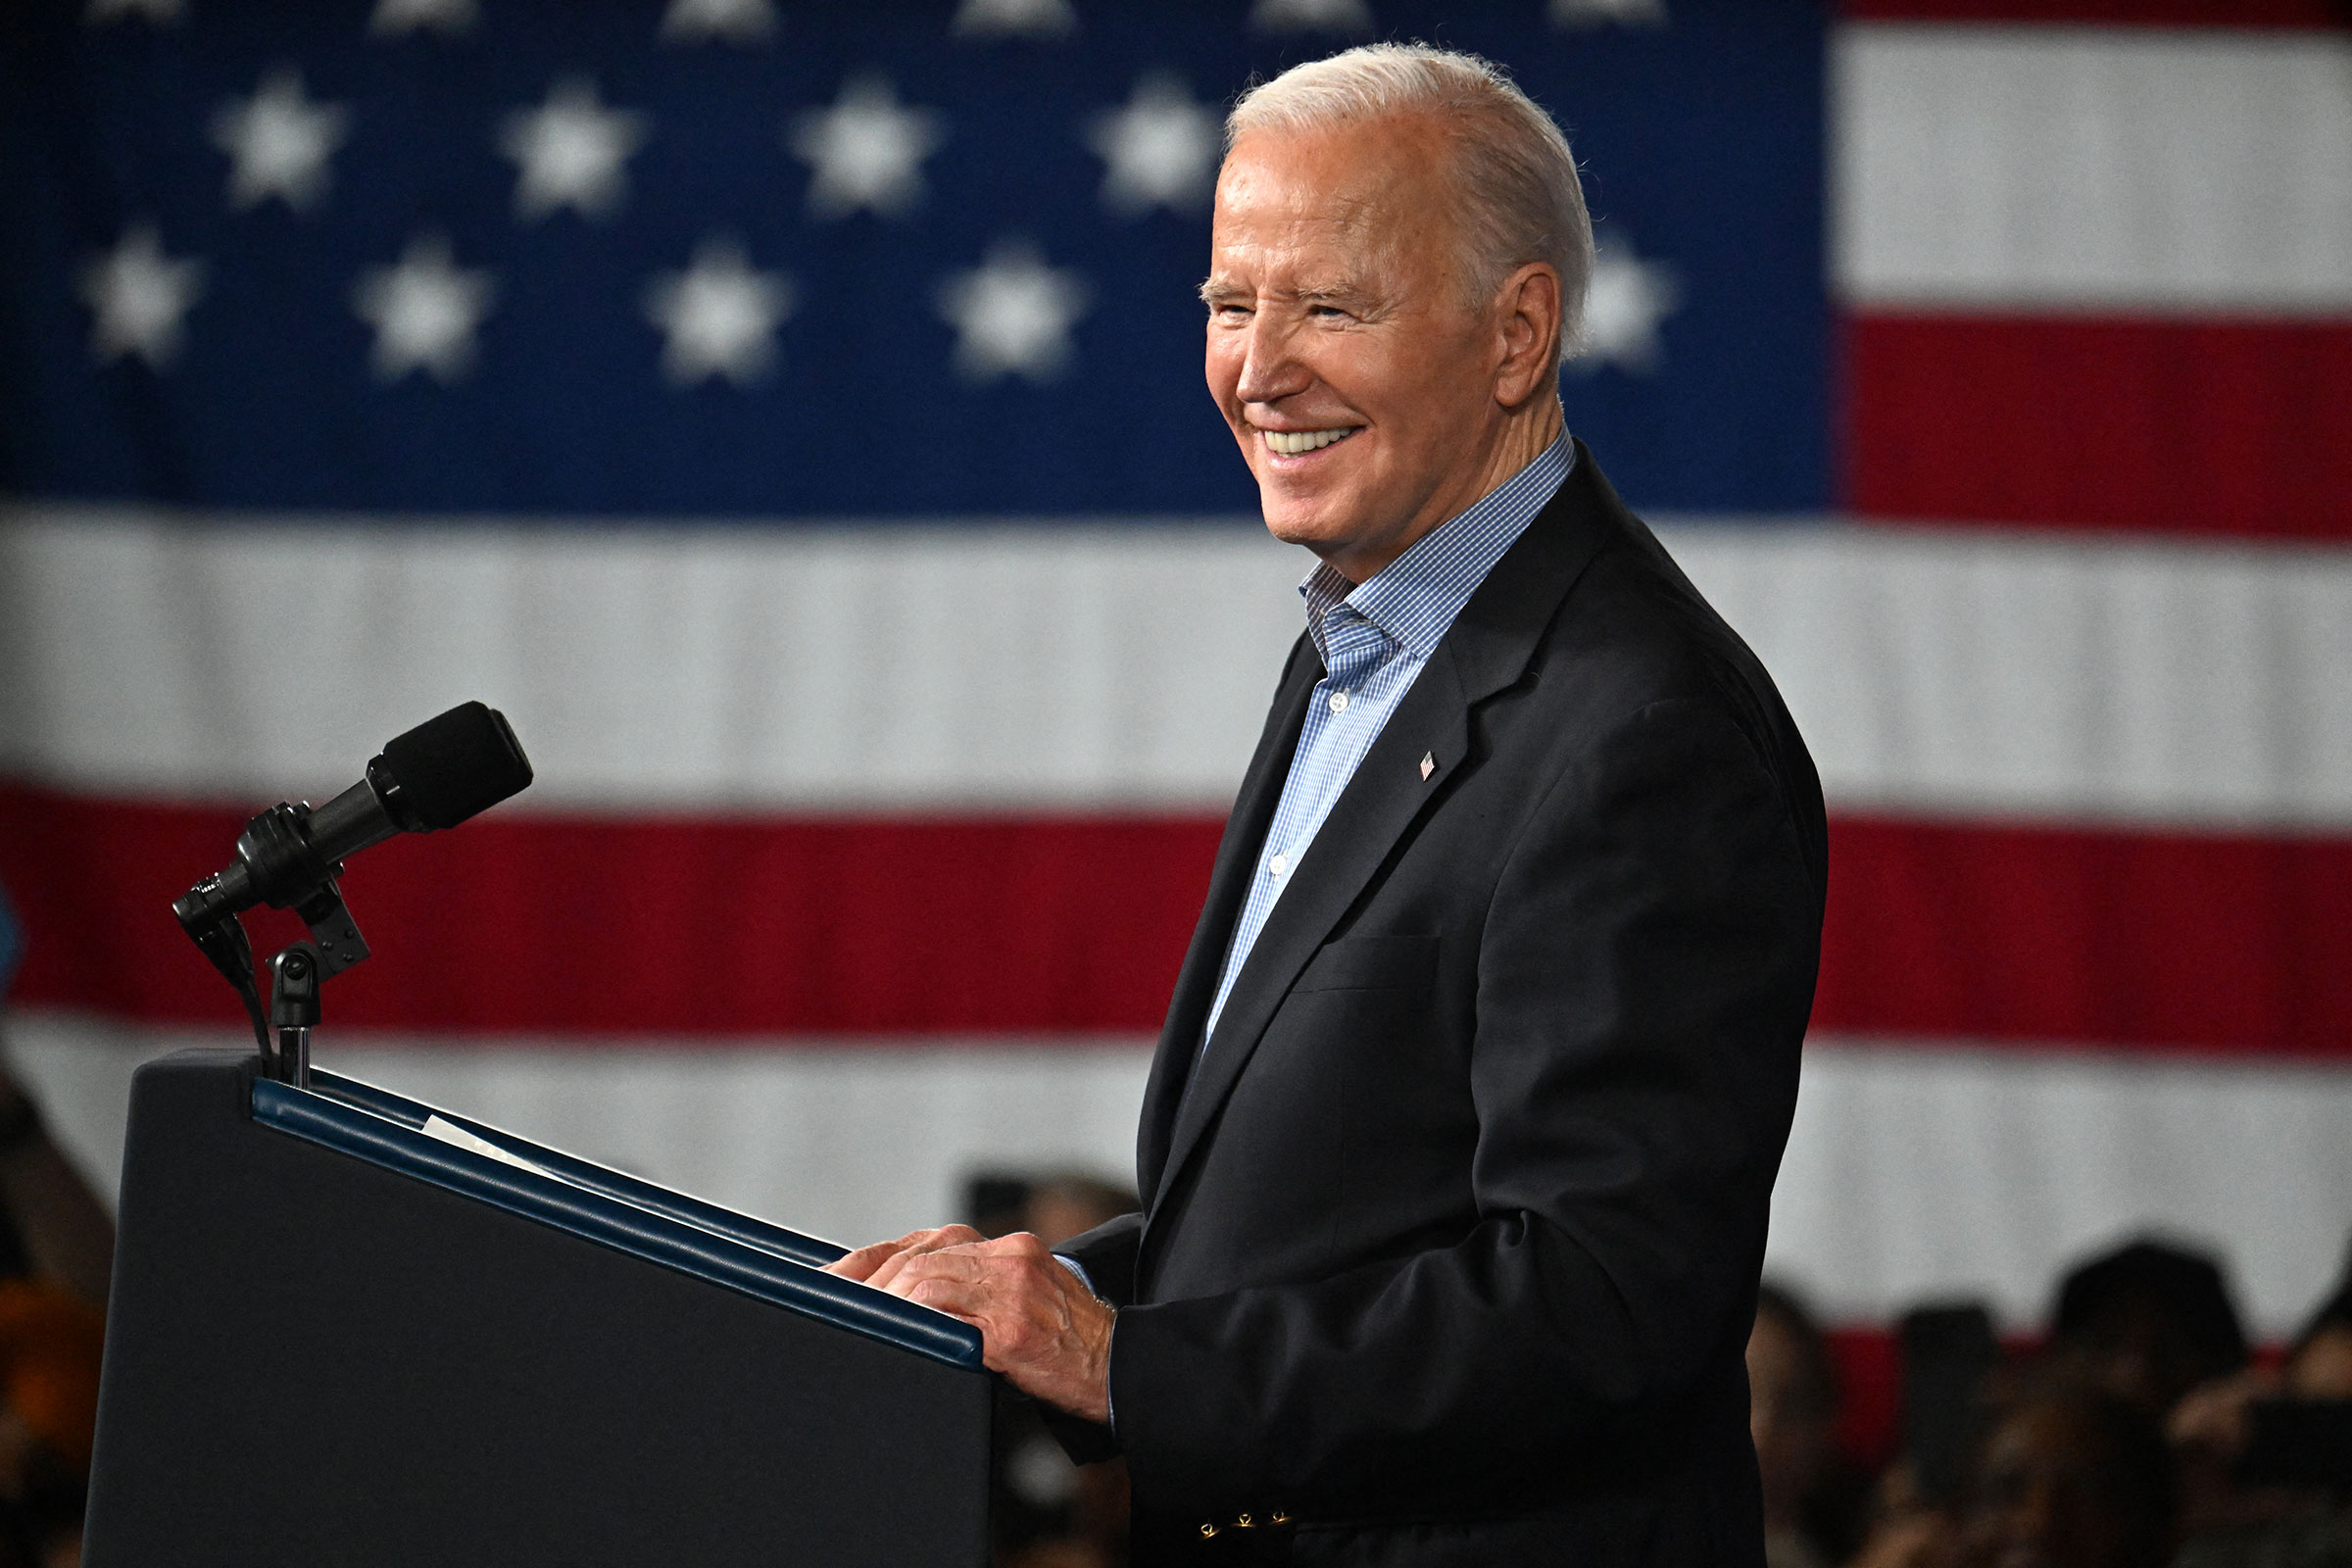 President Joe Biden speaks during a campaign event in Atlanta on March 9.